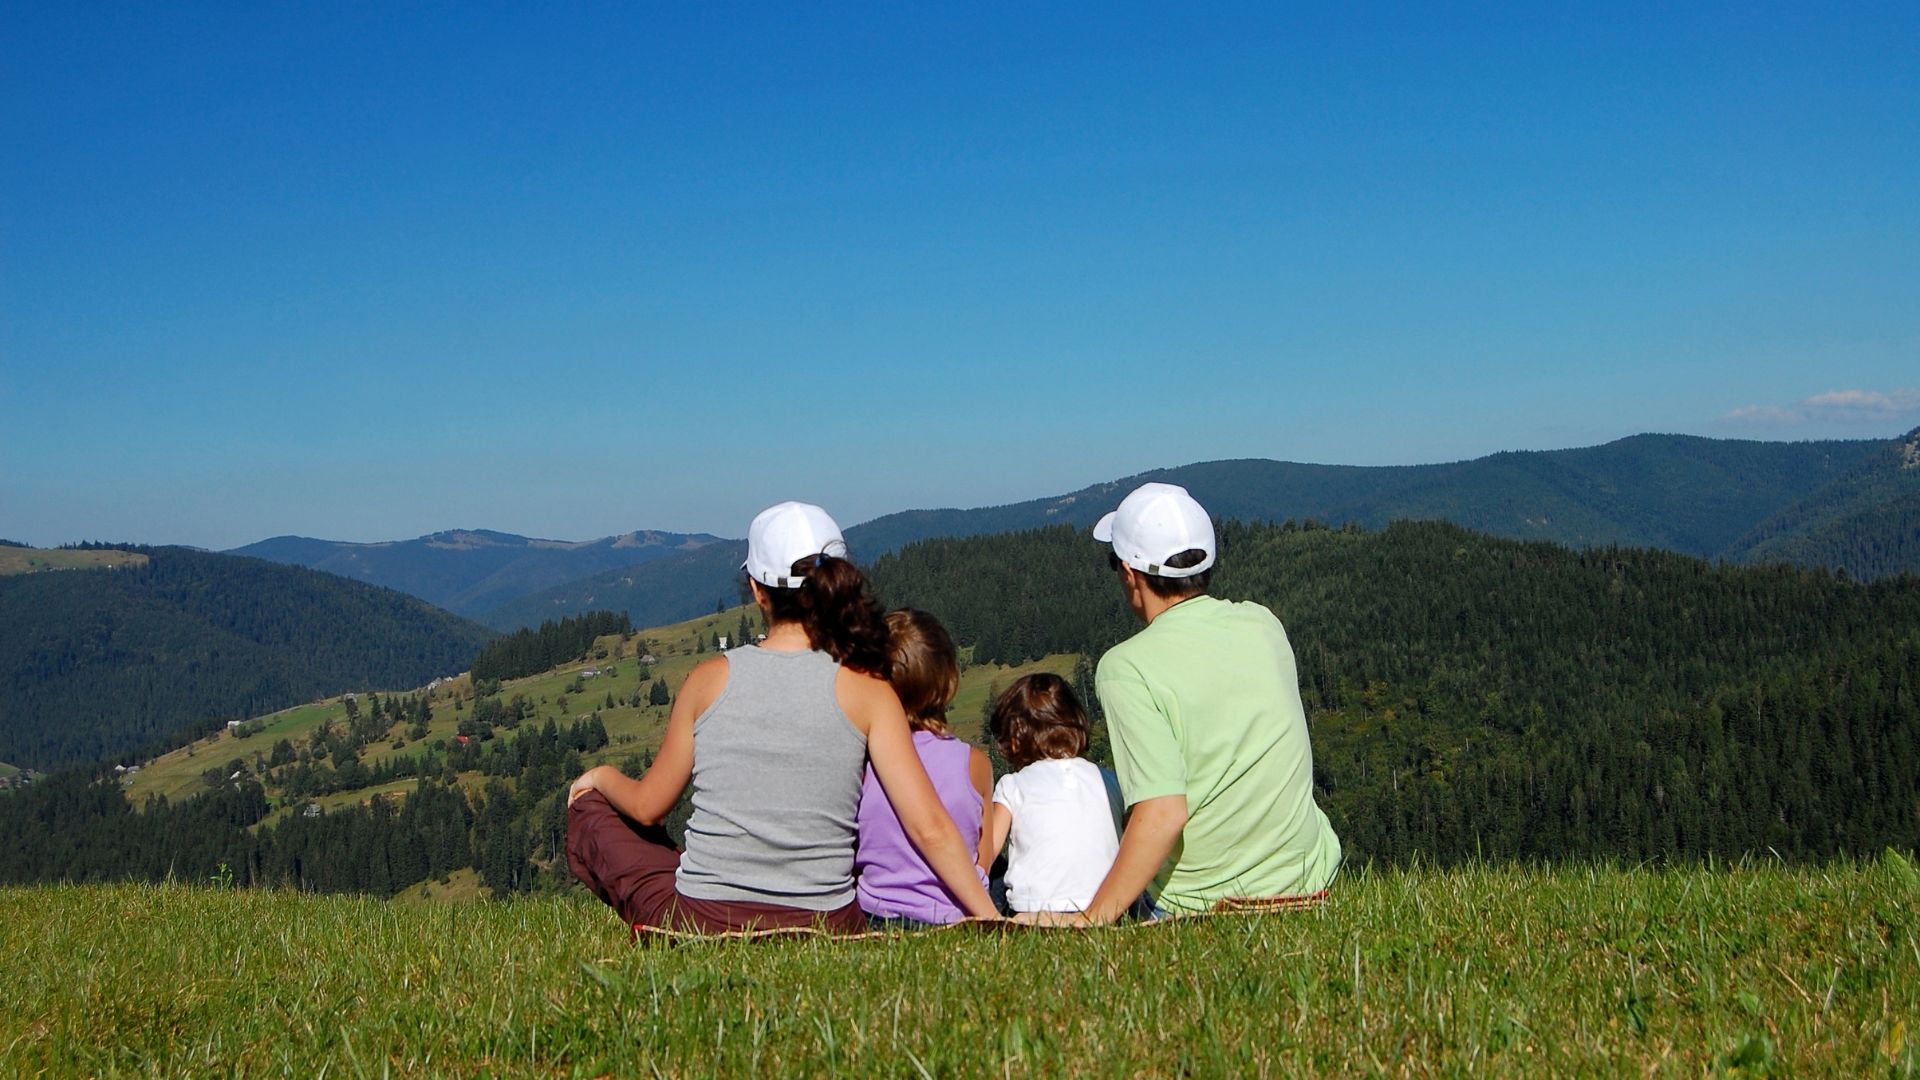 A Group Of People Sitting On A Hill Overlooking A Valley